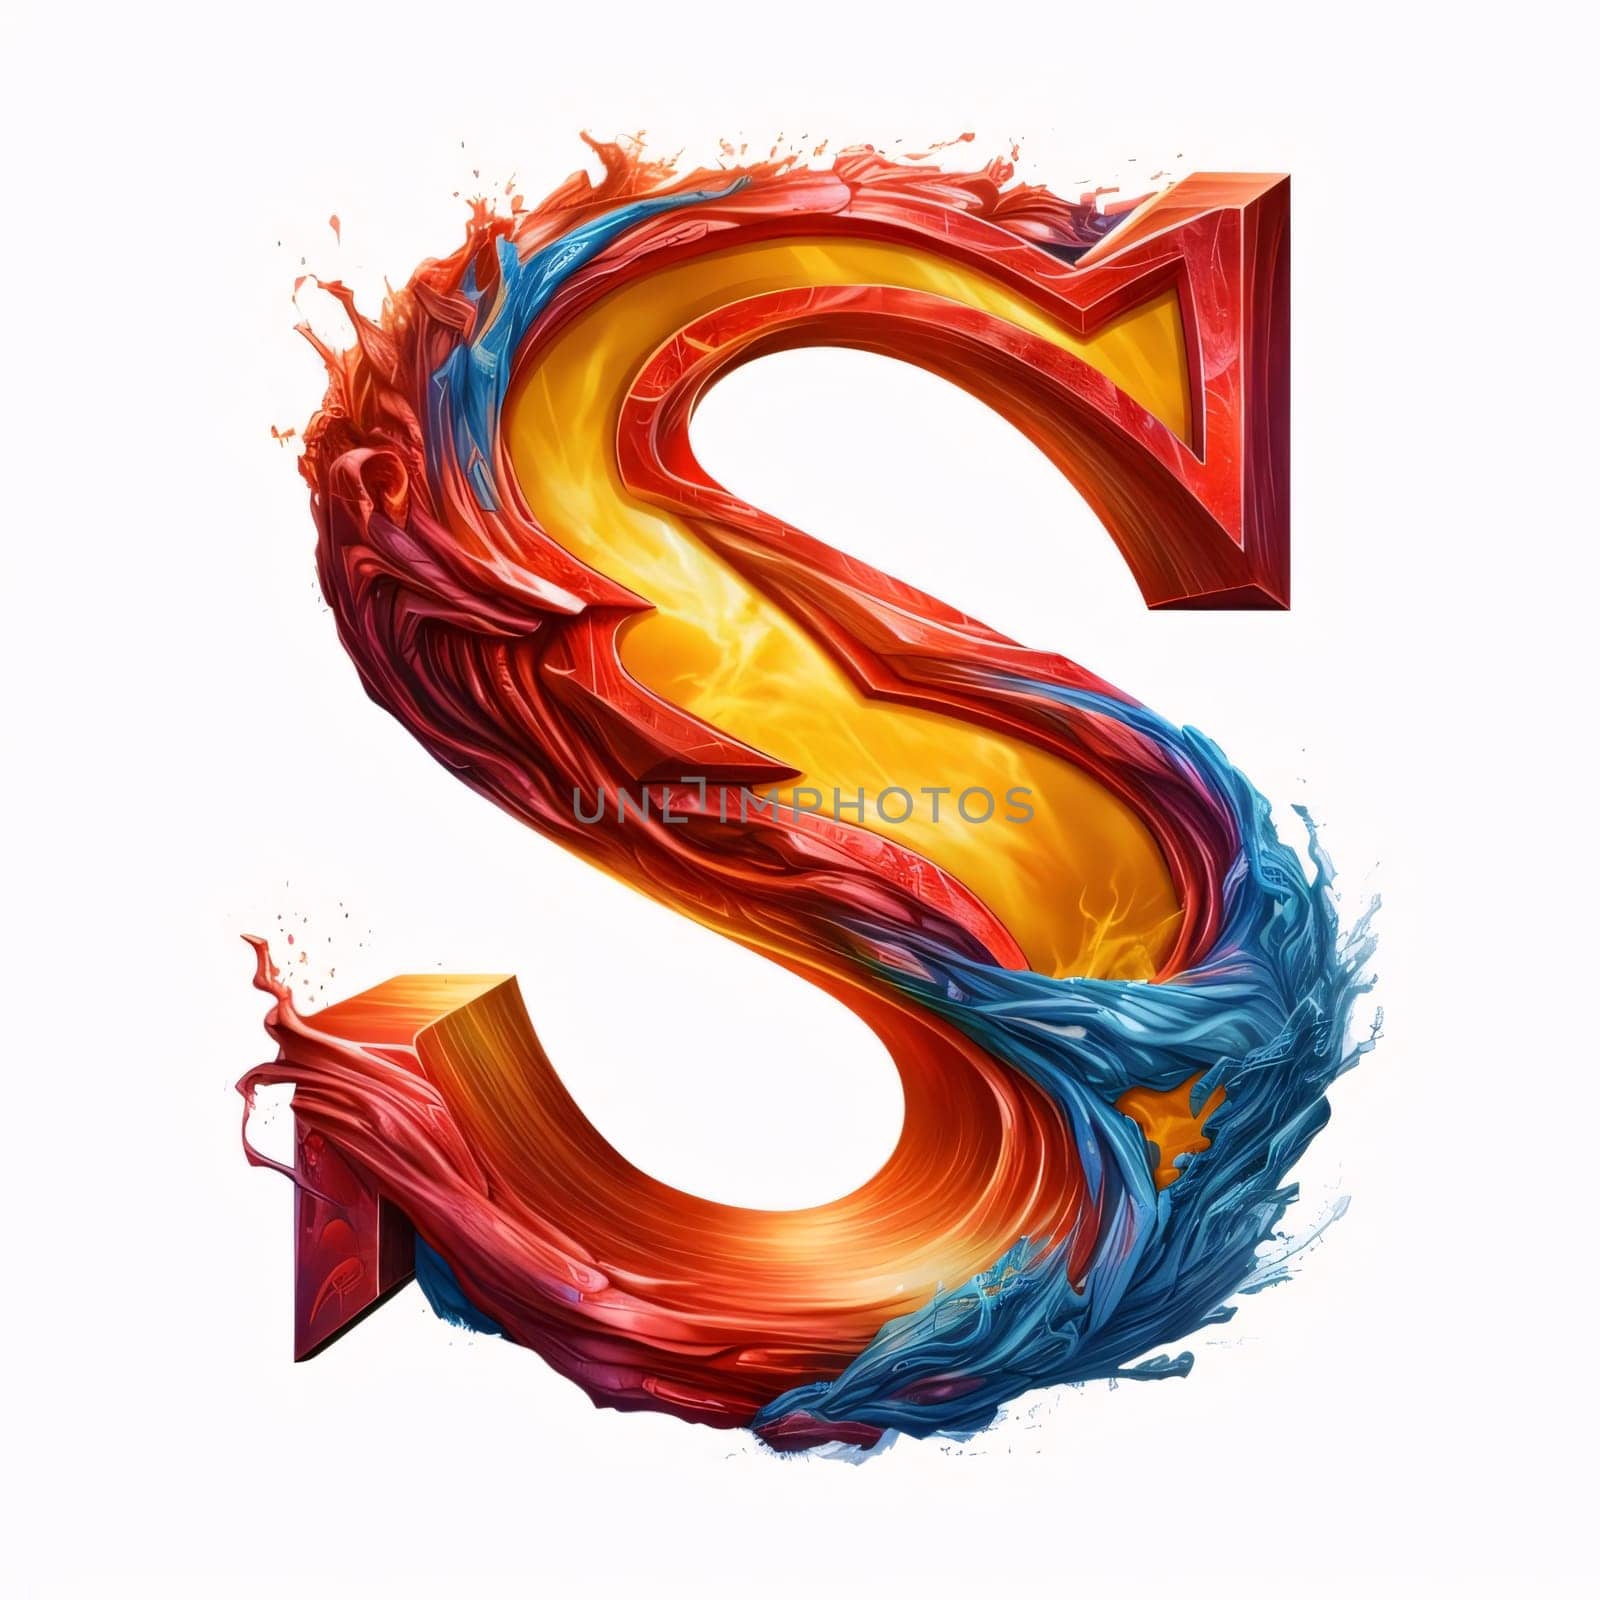 Graphic alphabet letters: Alphabet letter S made of fire and smoke isolated on white background